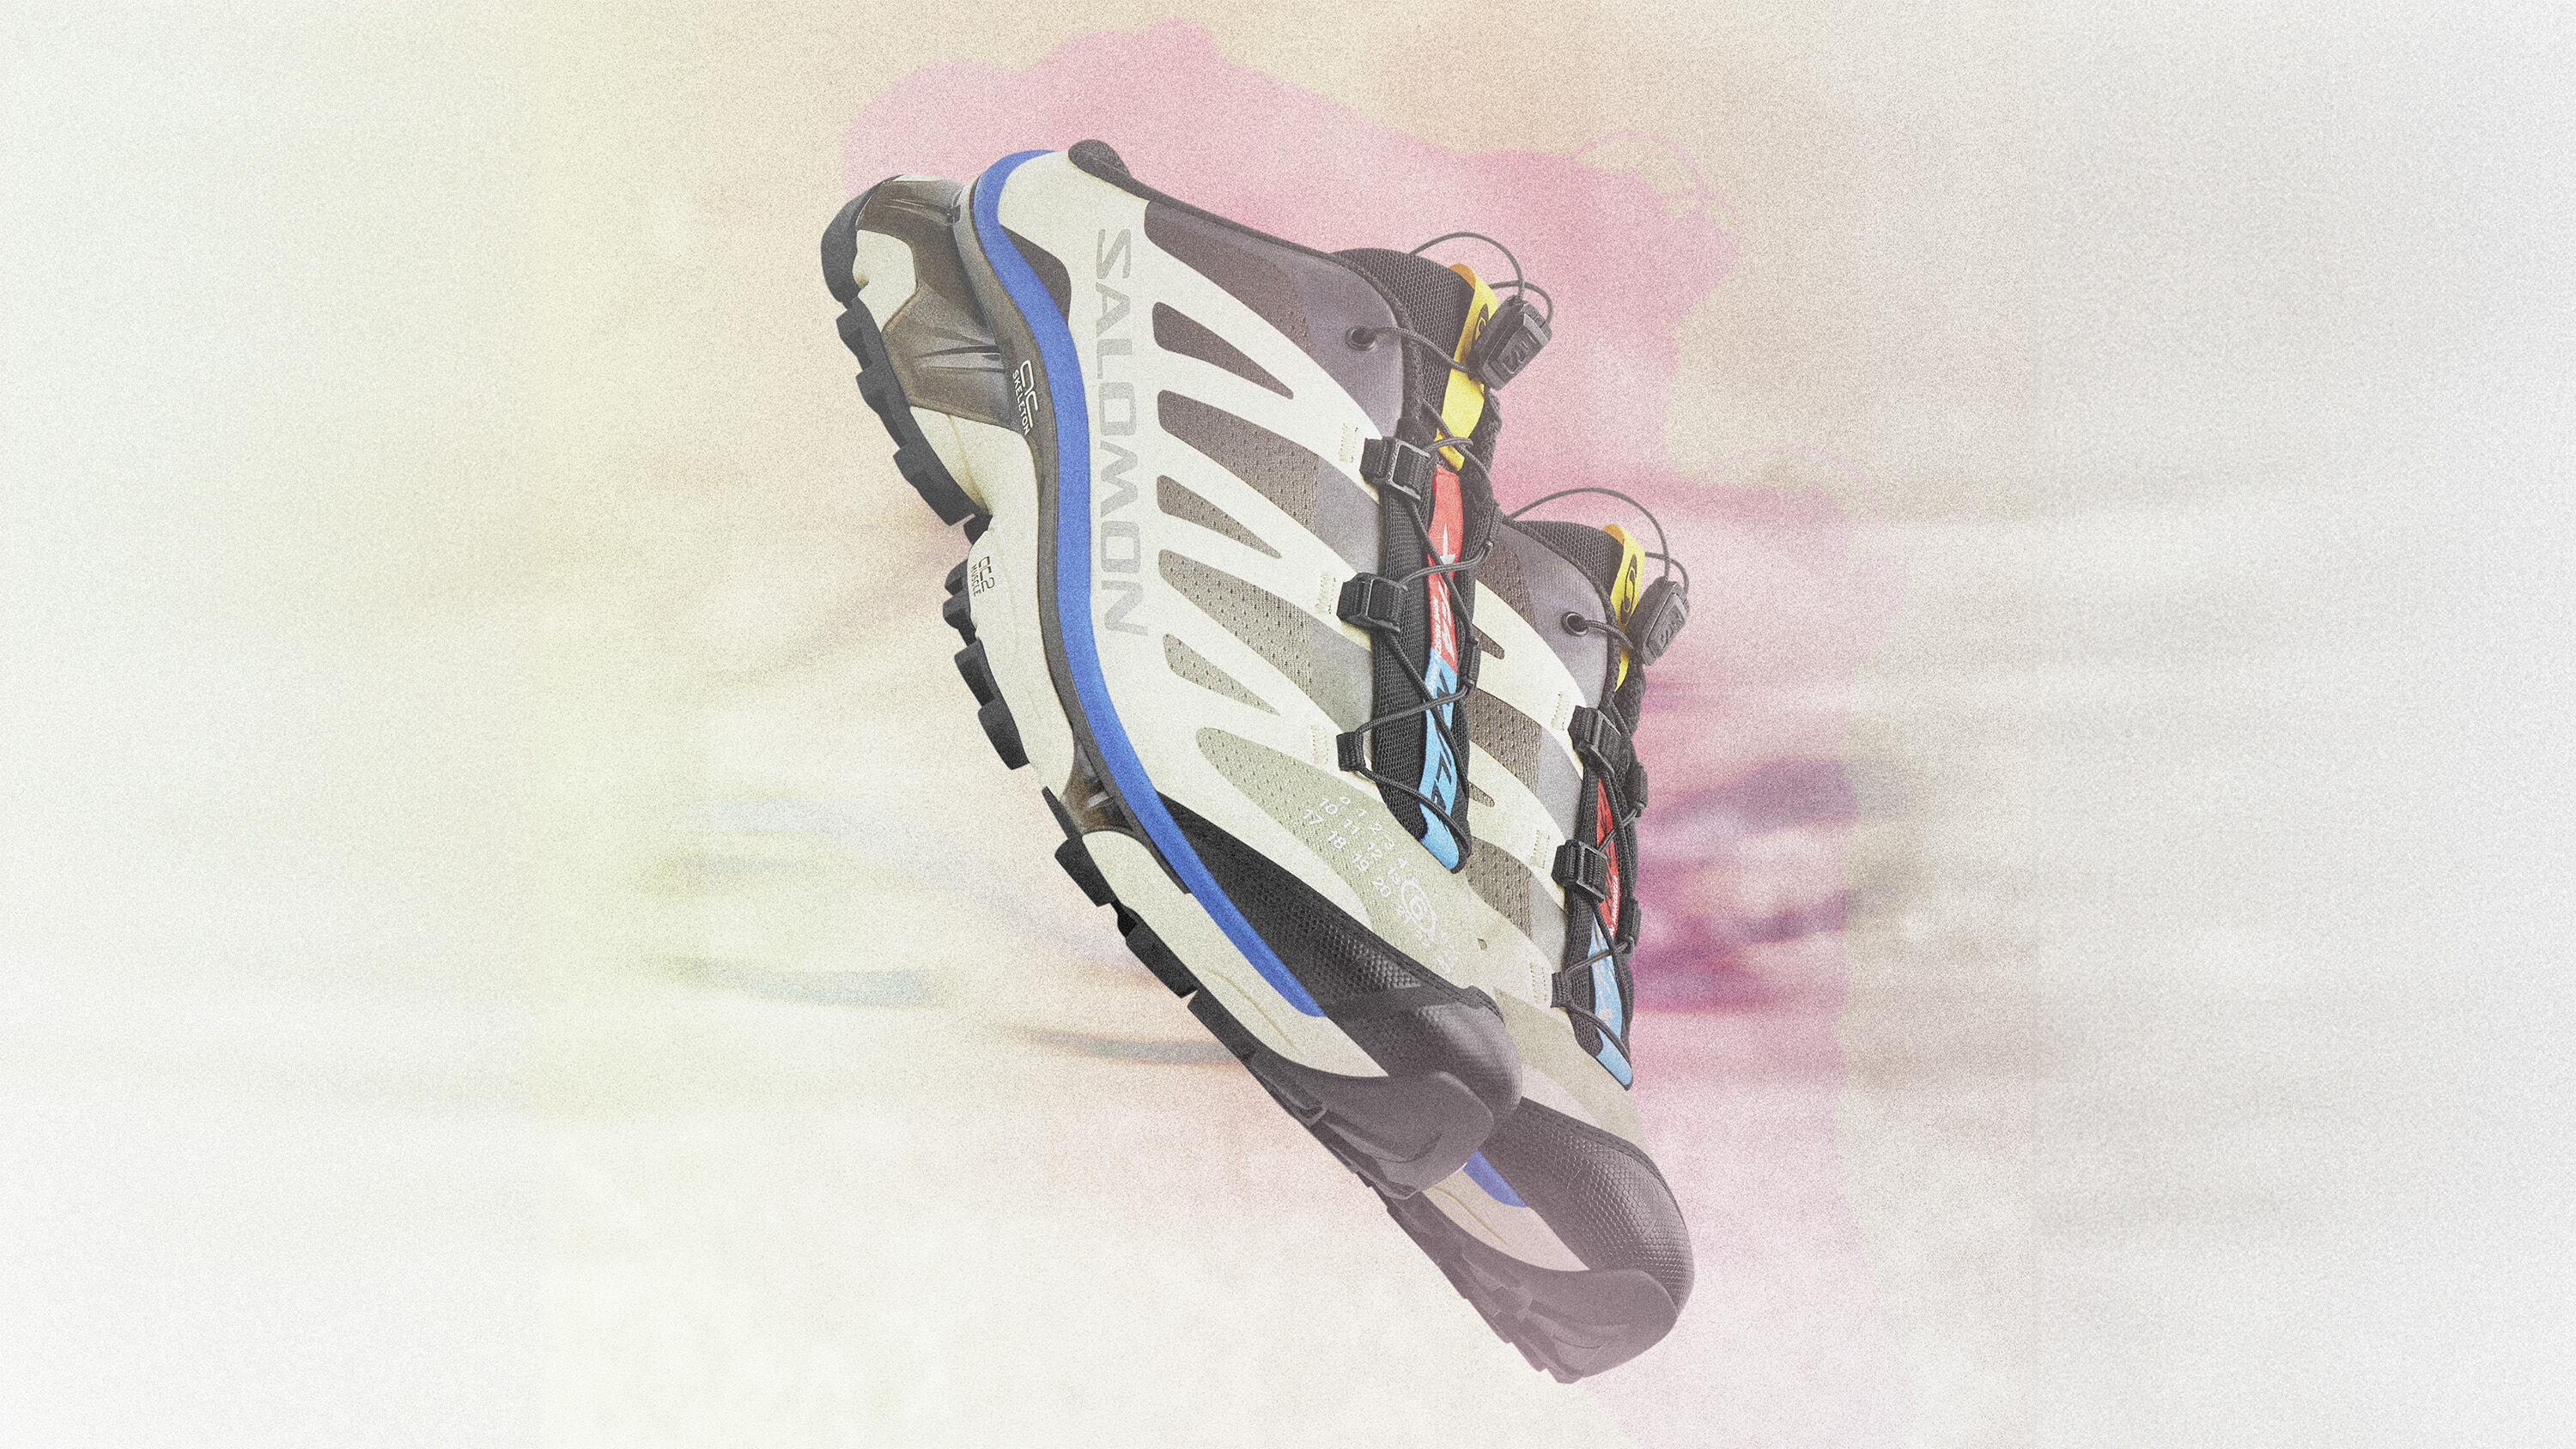 MM6 and Salomon reveal the XT-4 Mules from a new series in their ongoing collaboration; a celebration of a shared ethos offering unconventional perspectives on progressive and technically advanced designs.